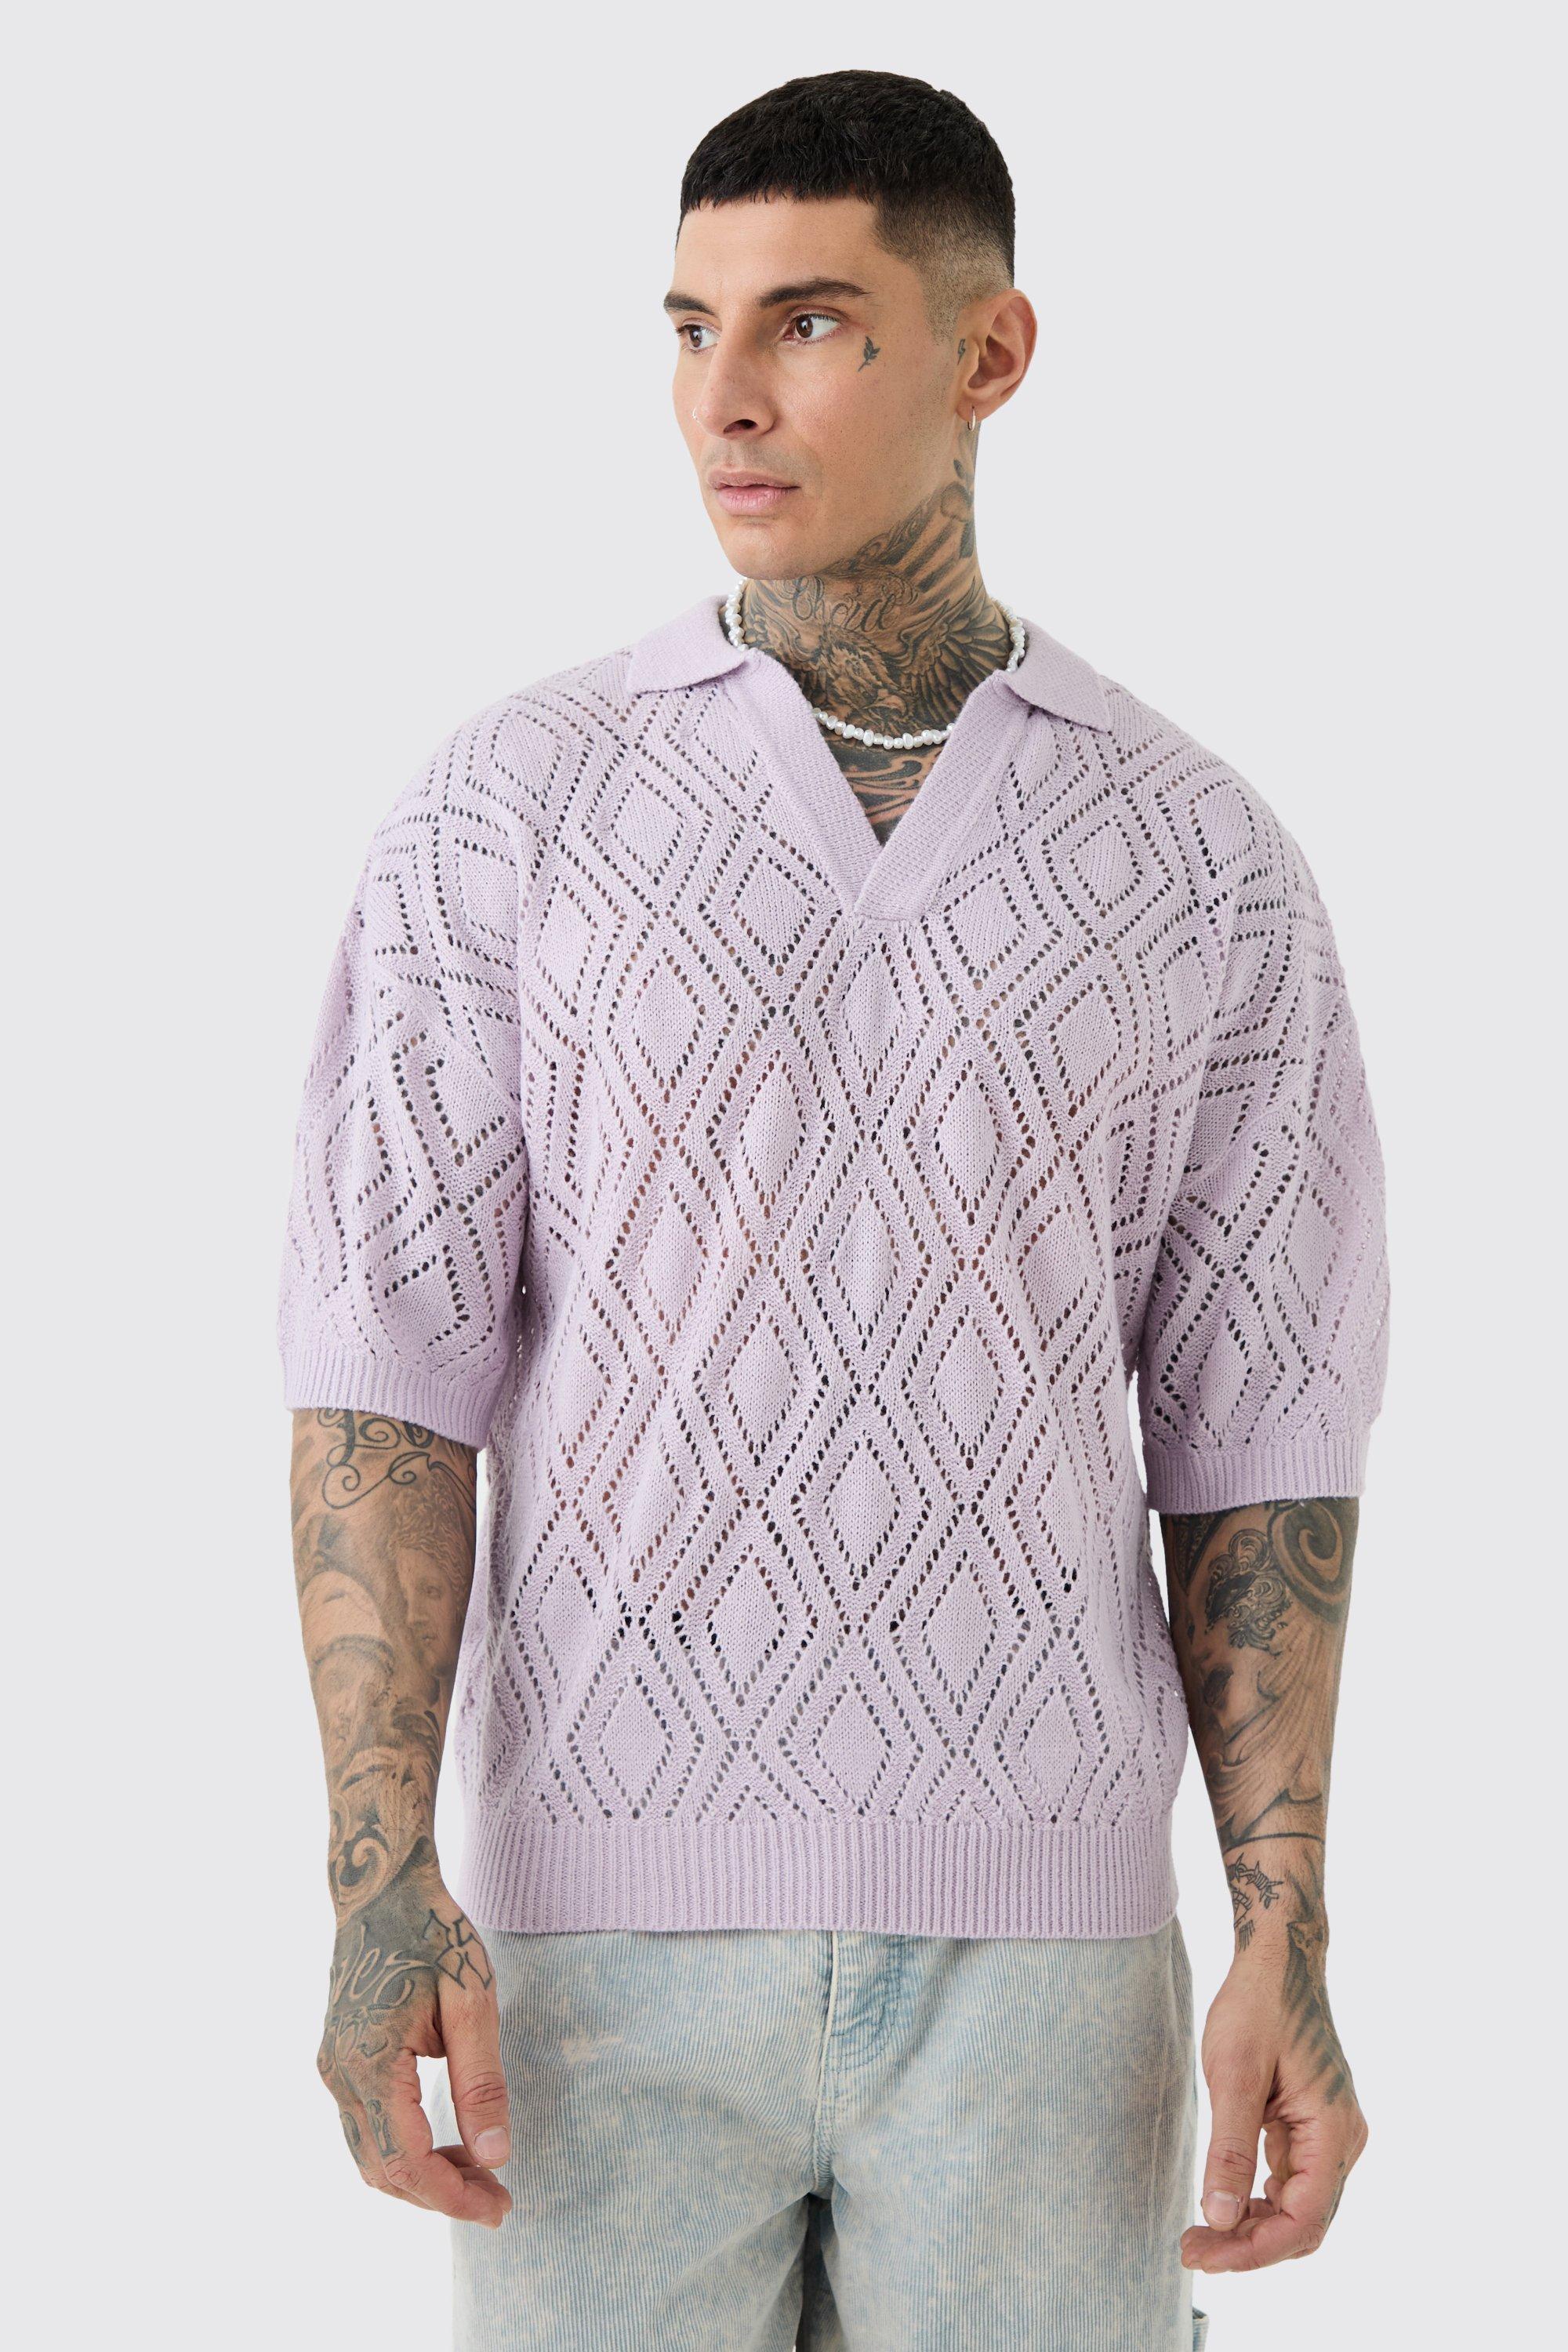 Image of Tall Short Sleeve Boxy Fit Revere Open Knit Polo In Ecru, Purple